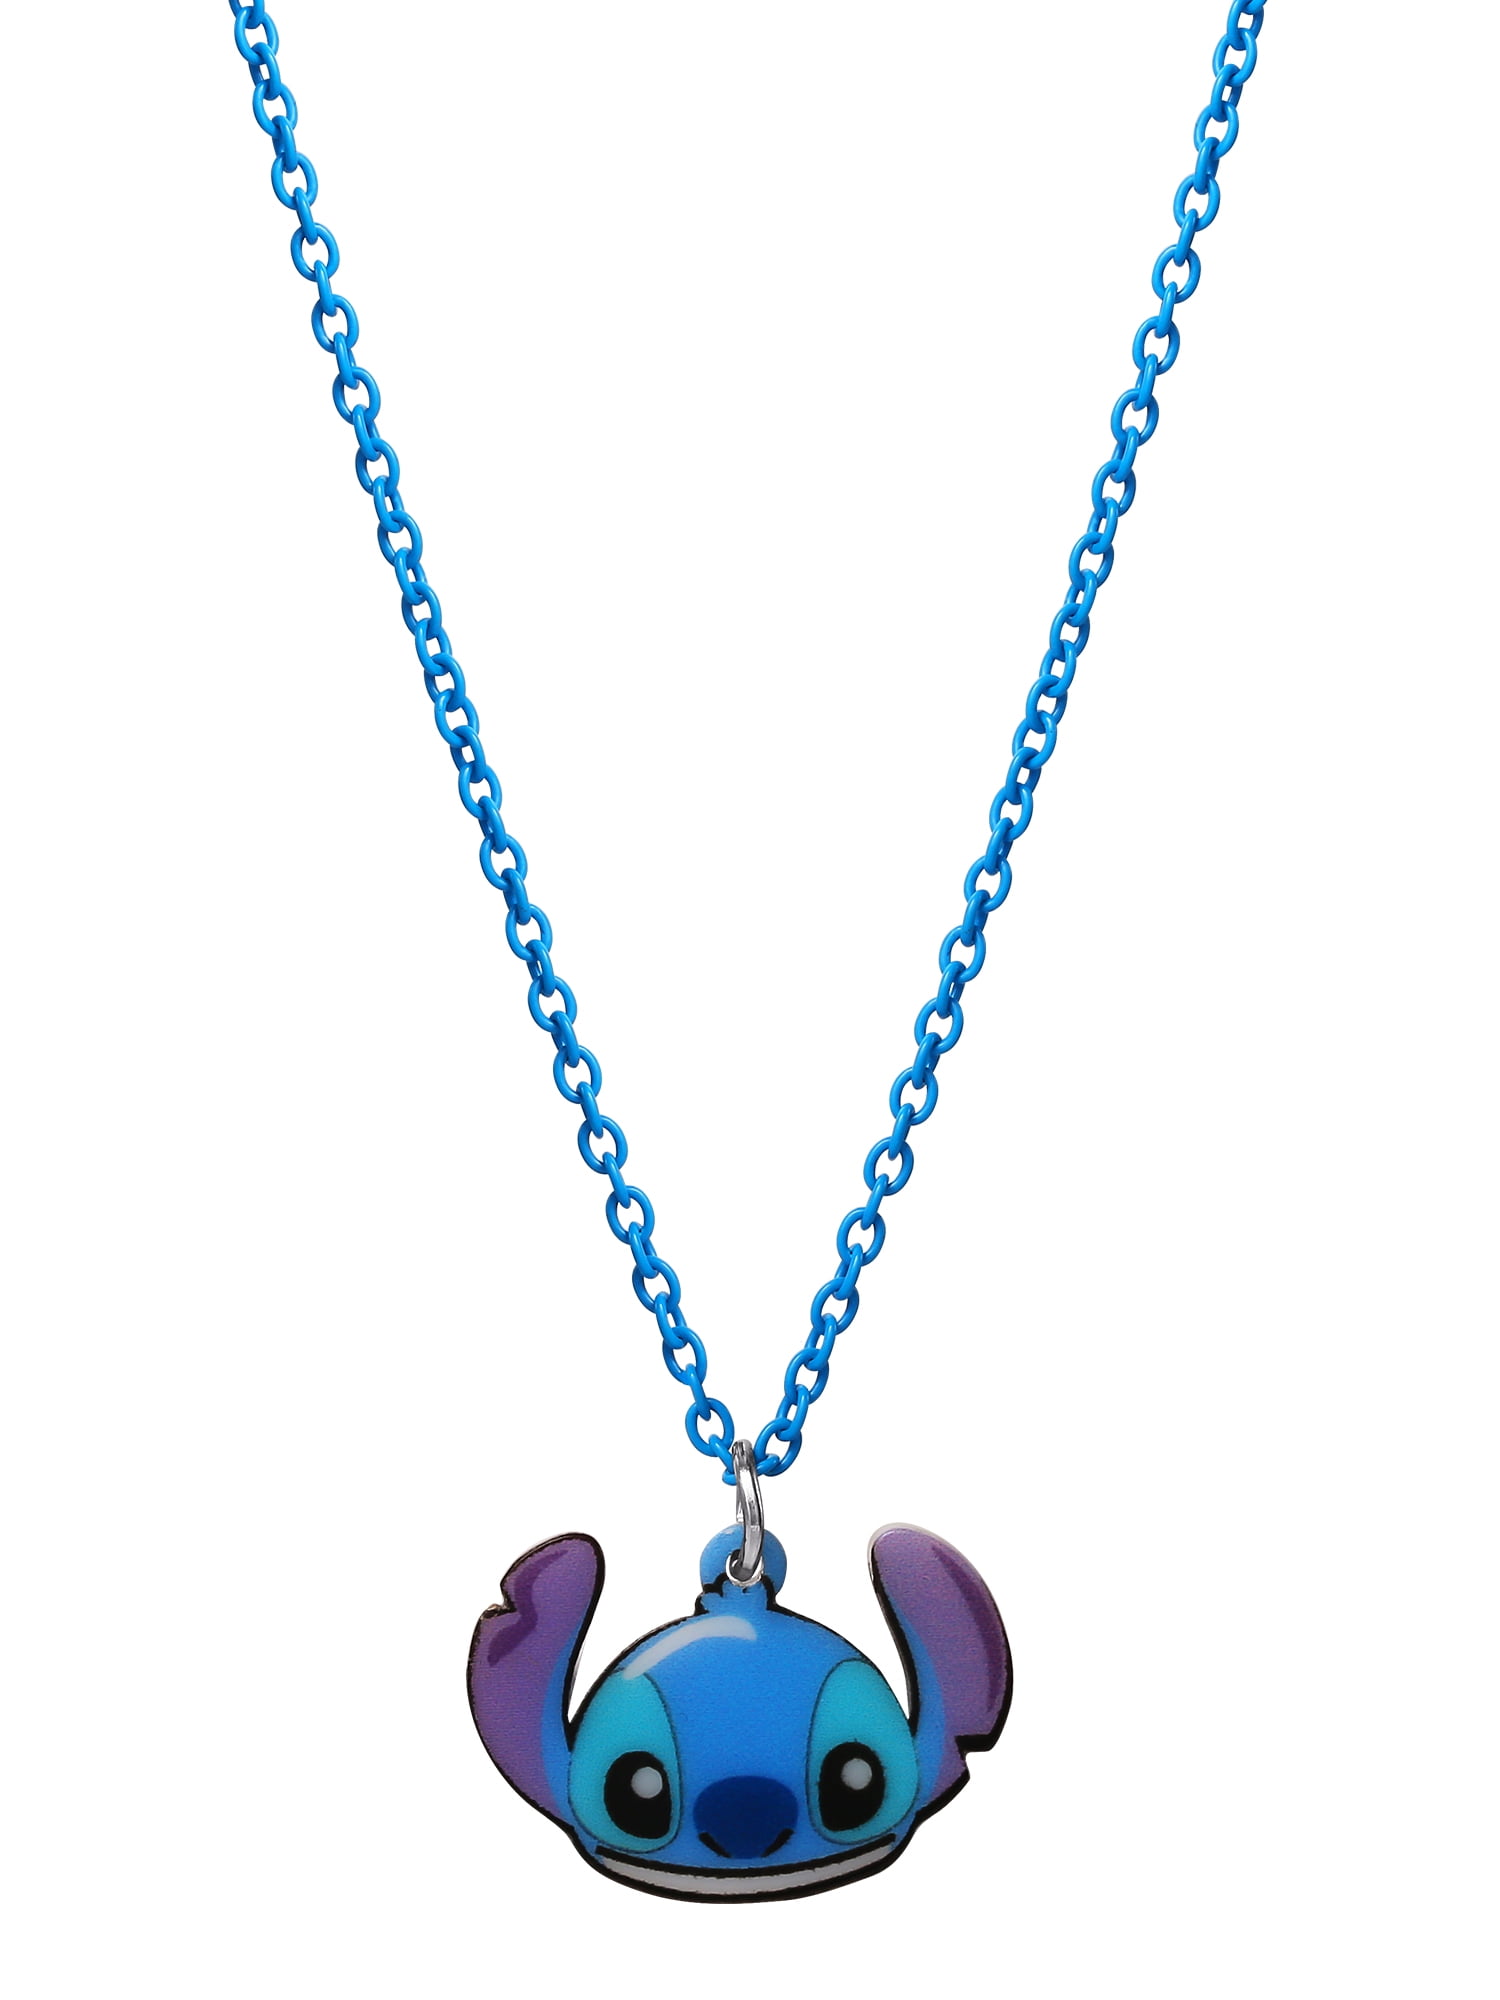 Silver Plated Heart Pendant Necklace Disney Lilo And Stitch 